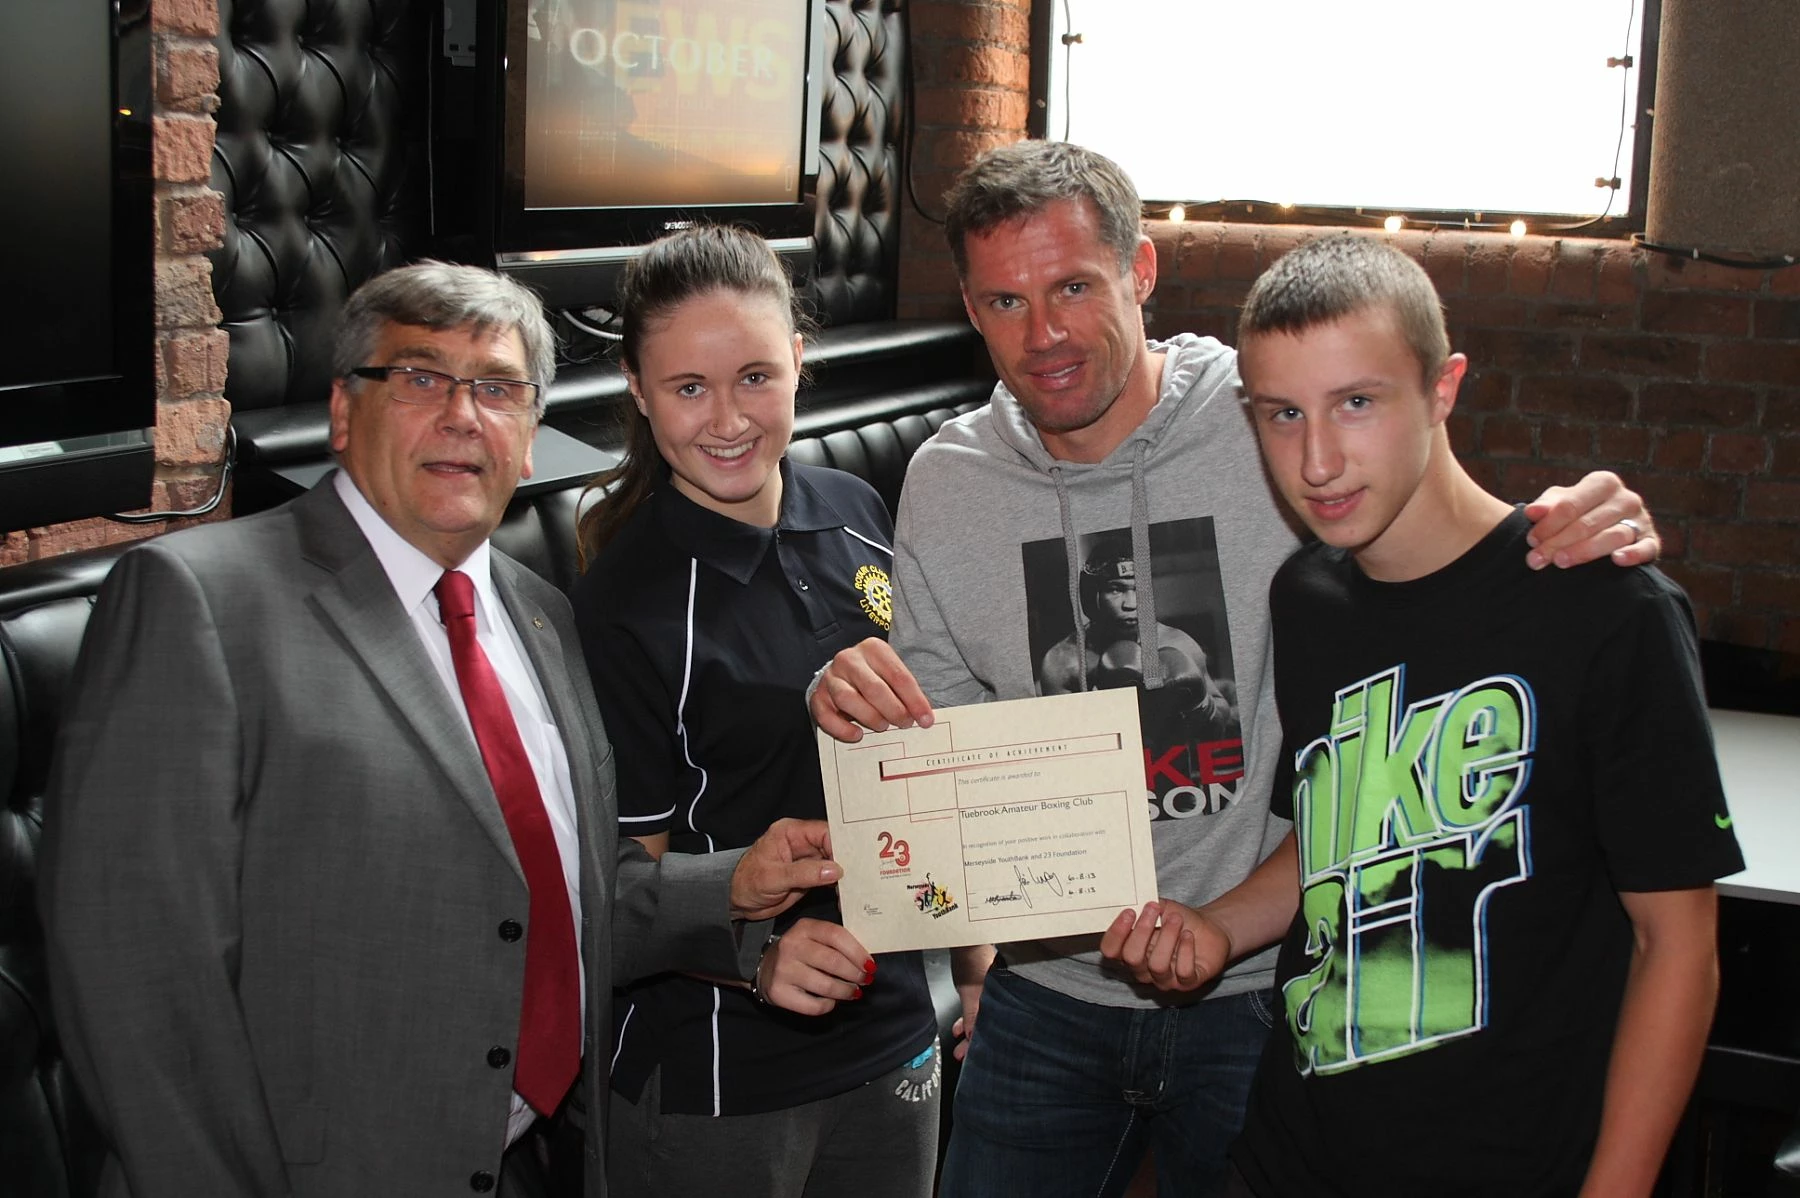 Liverpool FC legend Jamie Carragher with members of the Merseyside YouthBank.